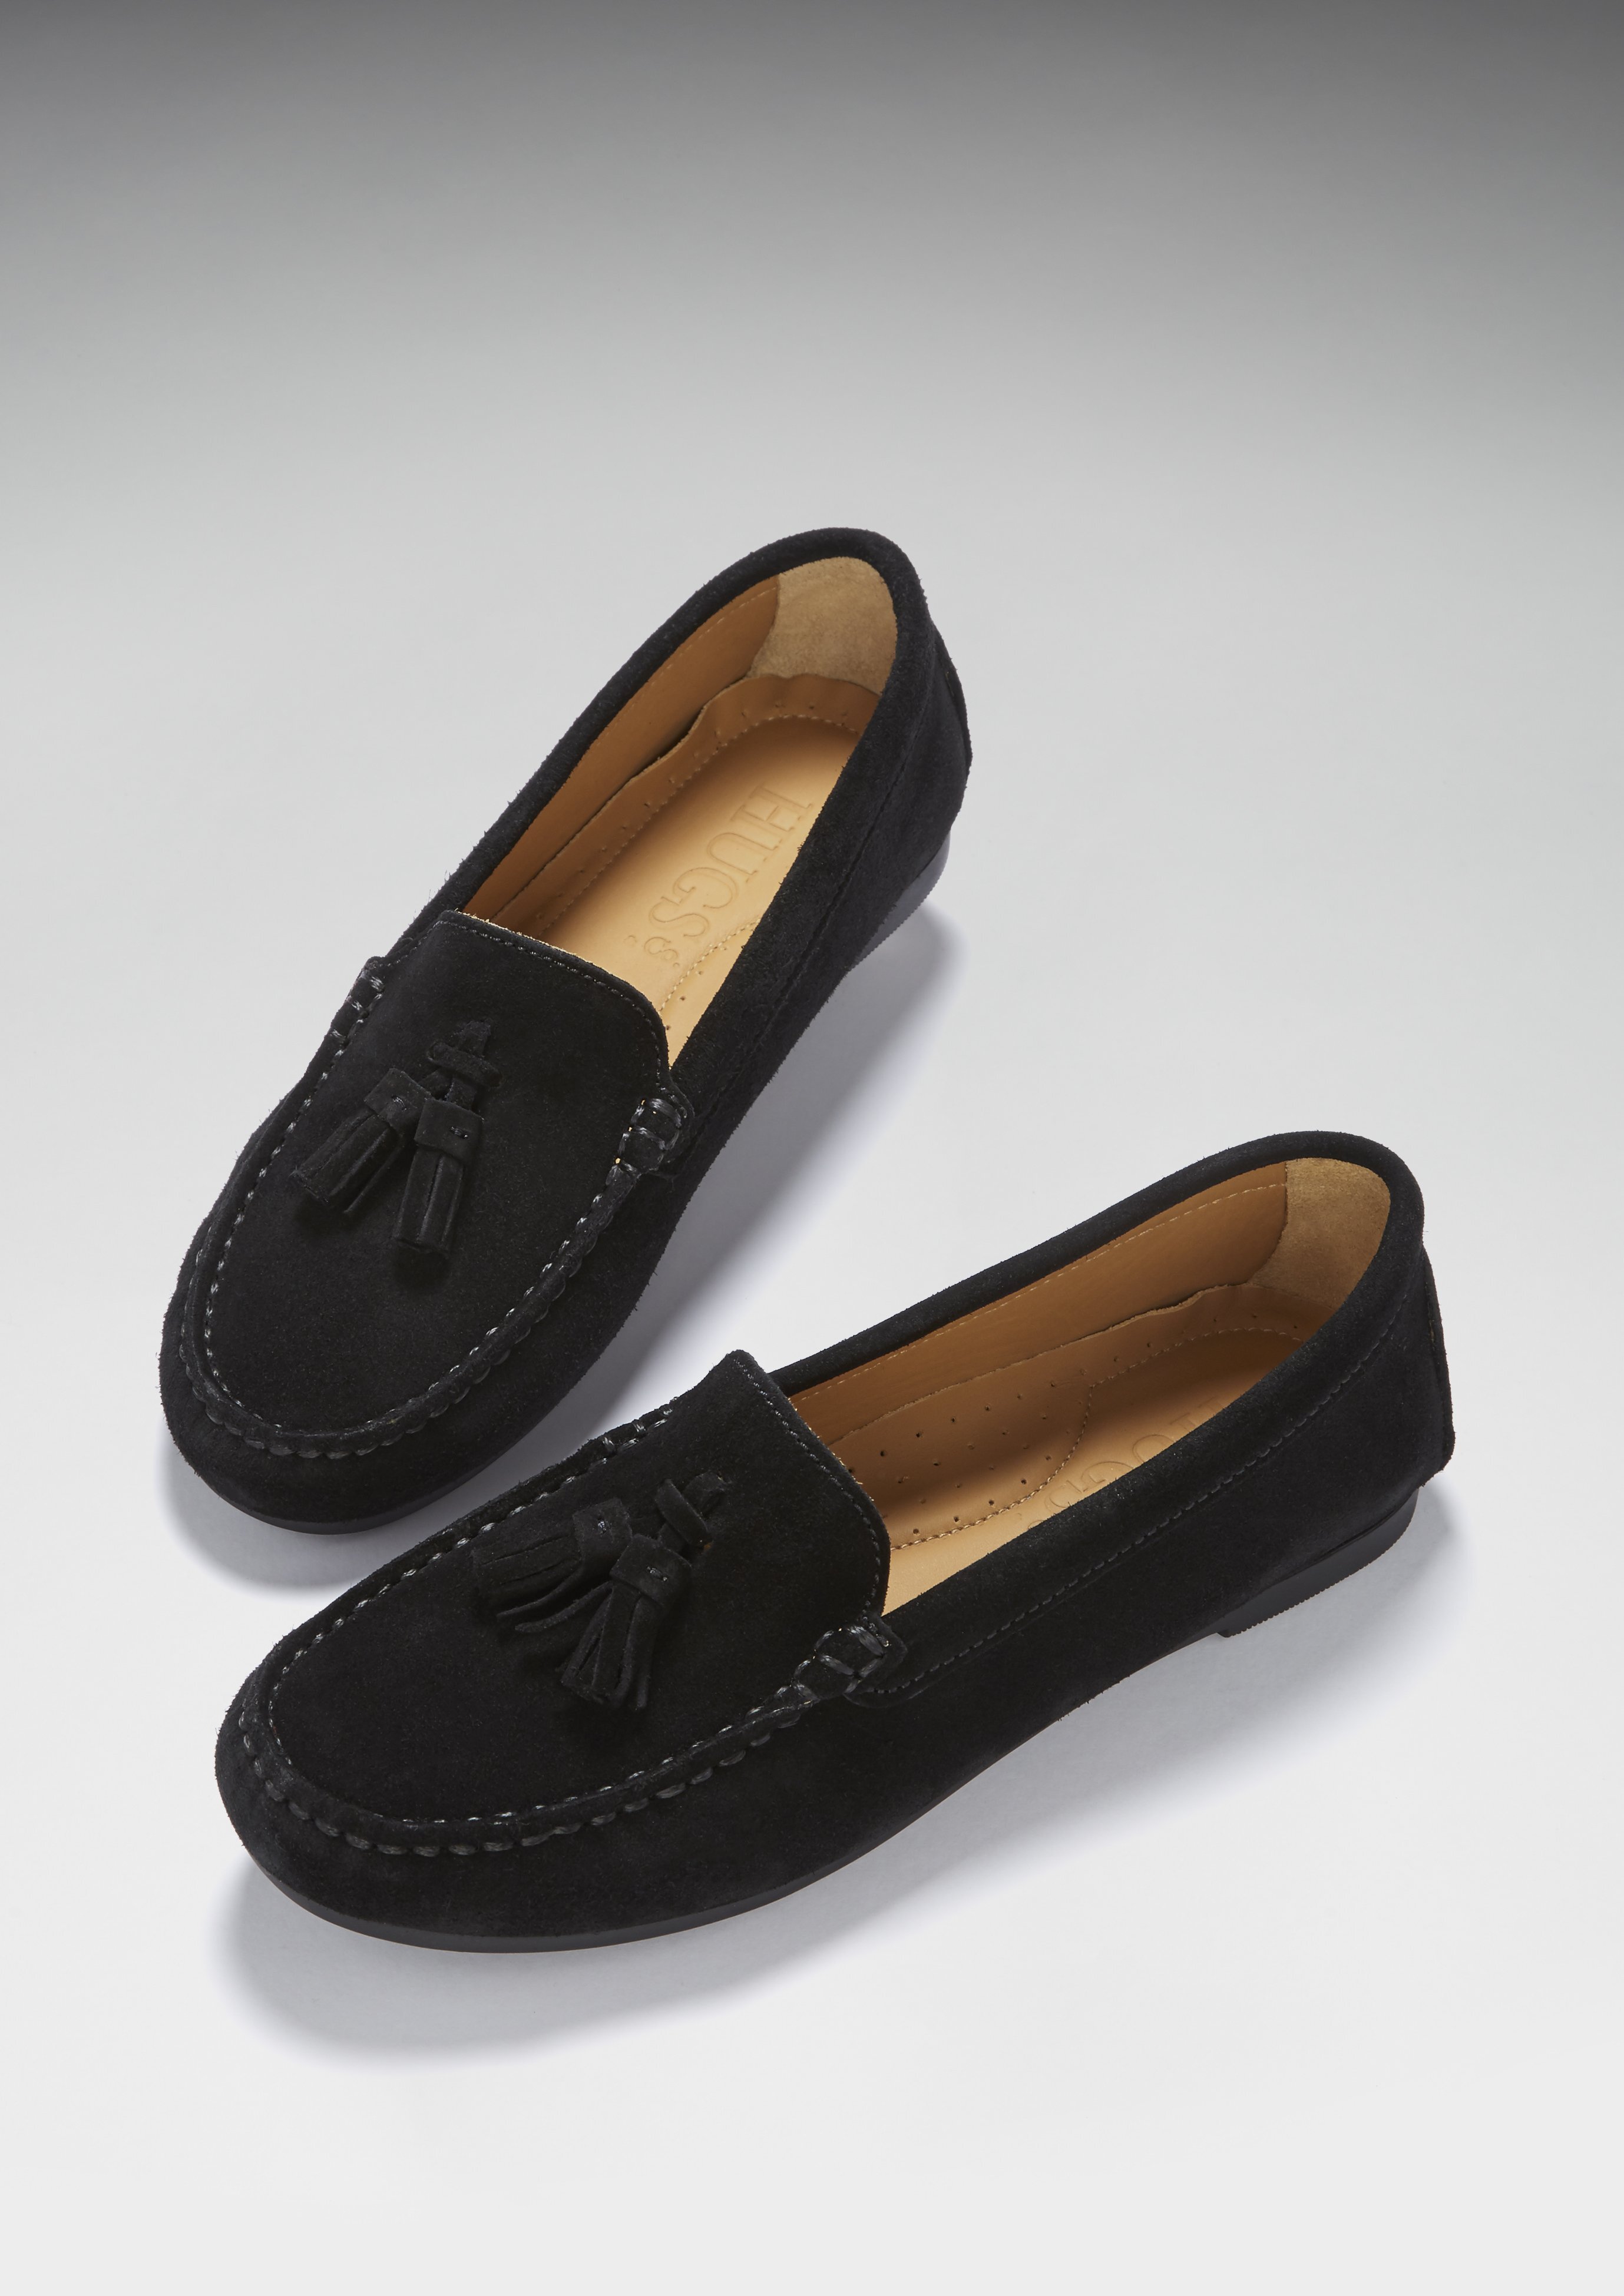 womens suede driving loafers